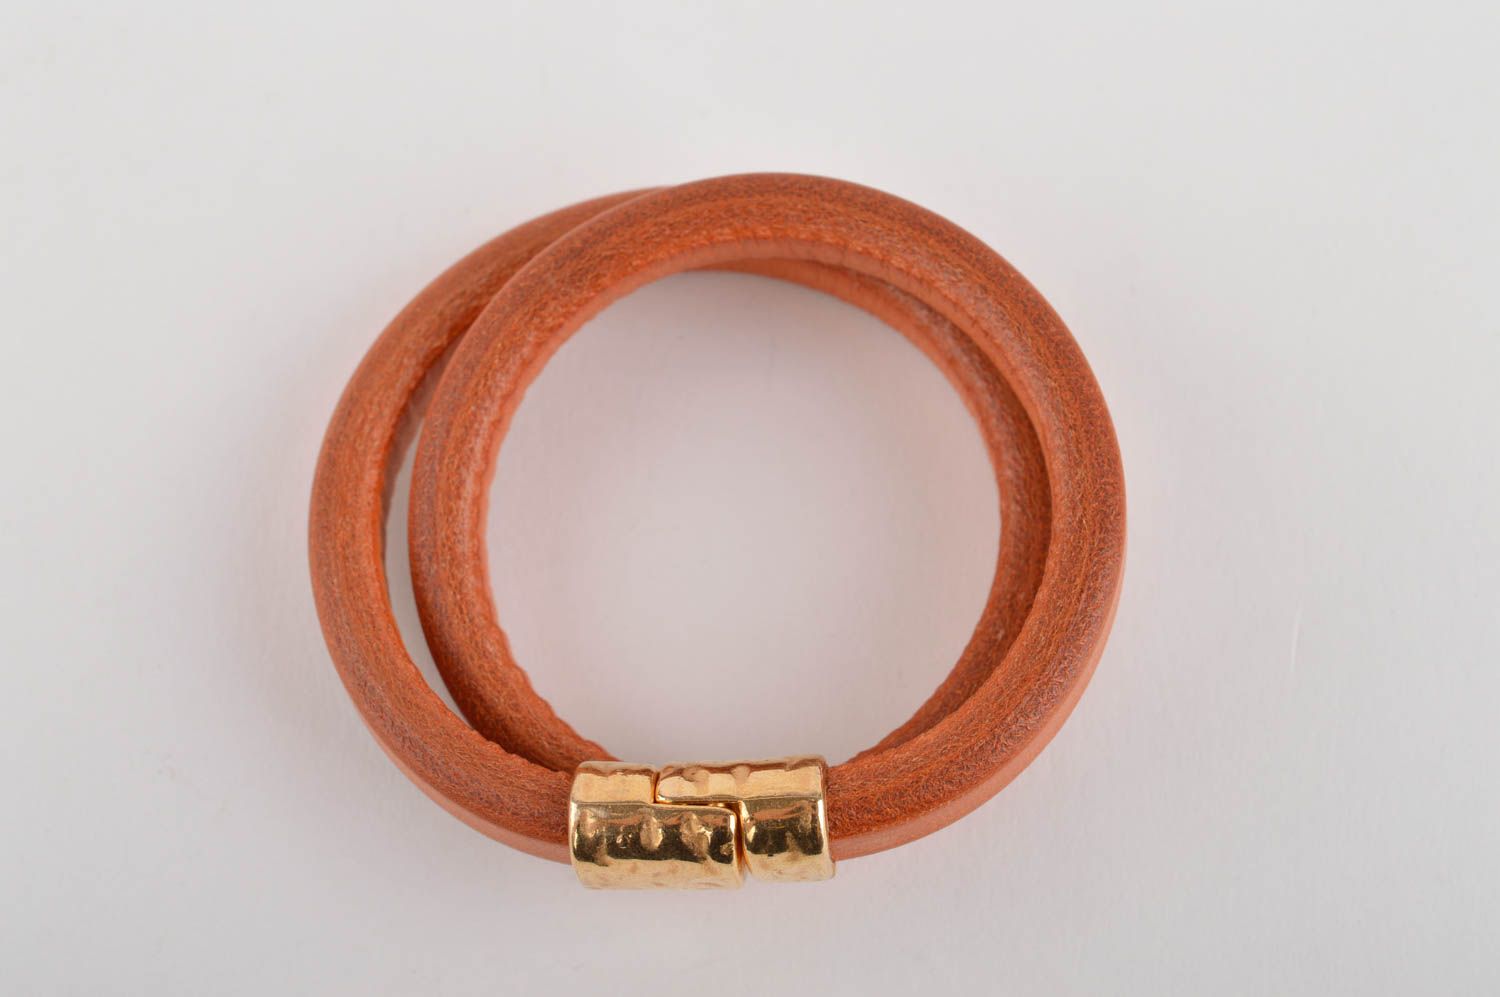 Beautiful handmade leather bracelet leather necklace leather goods small gifts photo 5